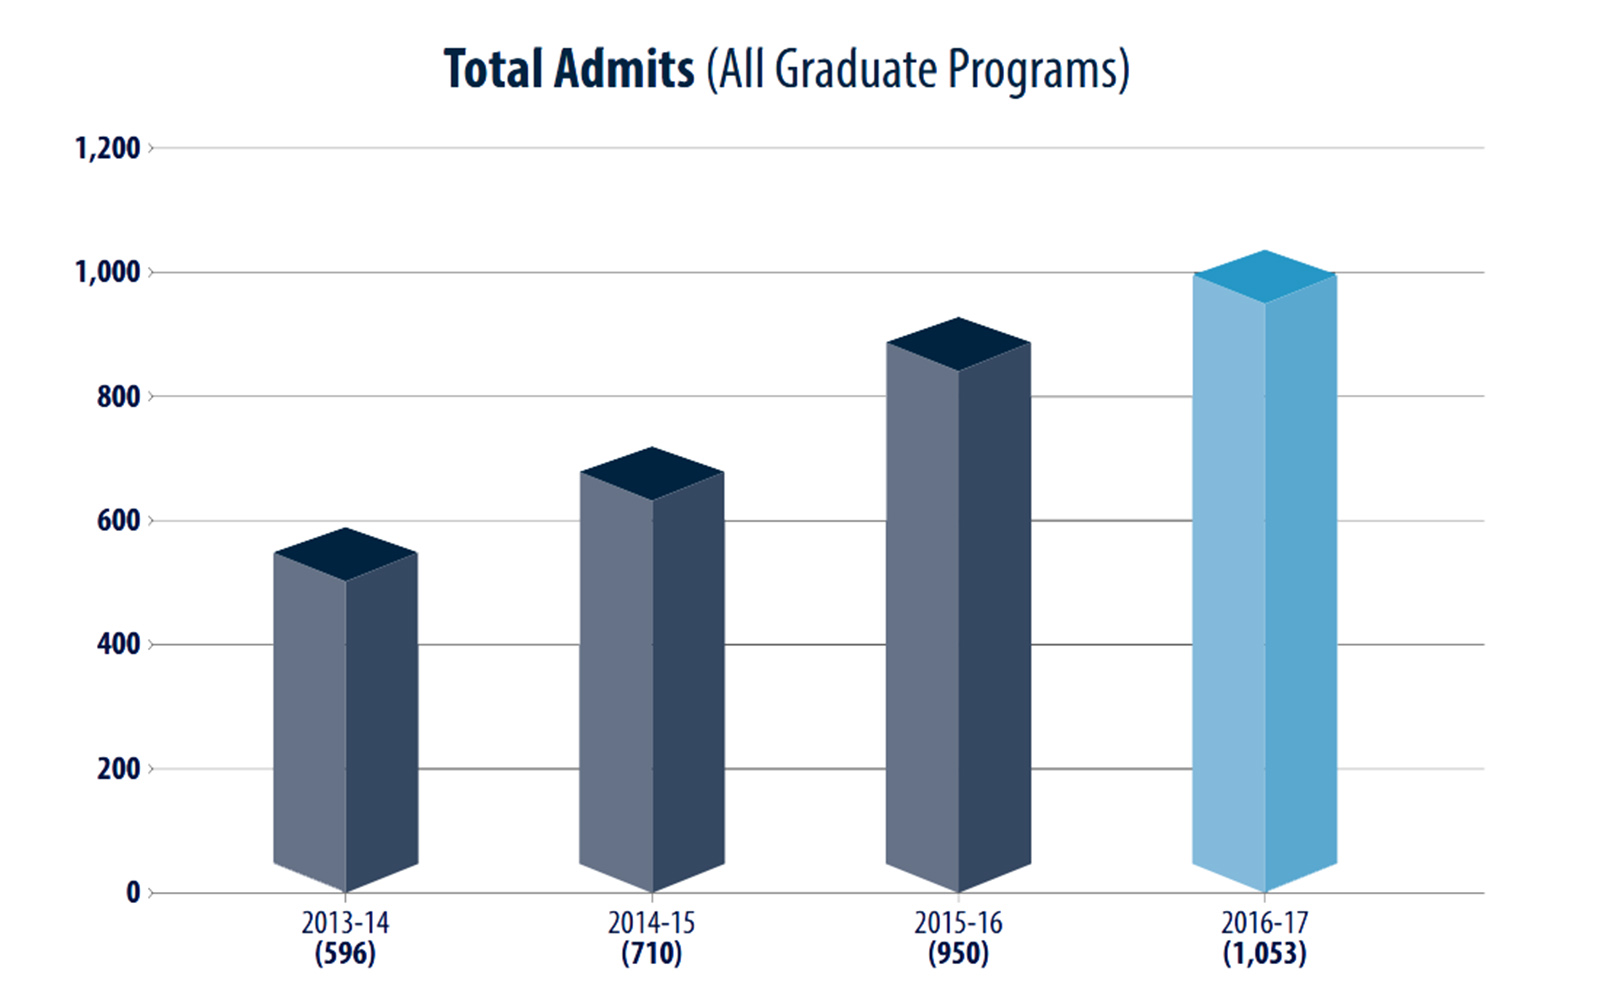 Graduate business program enrollments have soared in recent years, driven in large part by the launch of our newest specialty masters degrees - MSFRM (2010) and MSBAPM (2011).